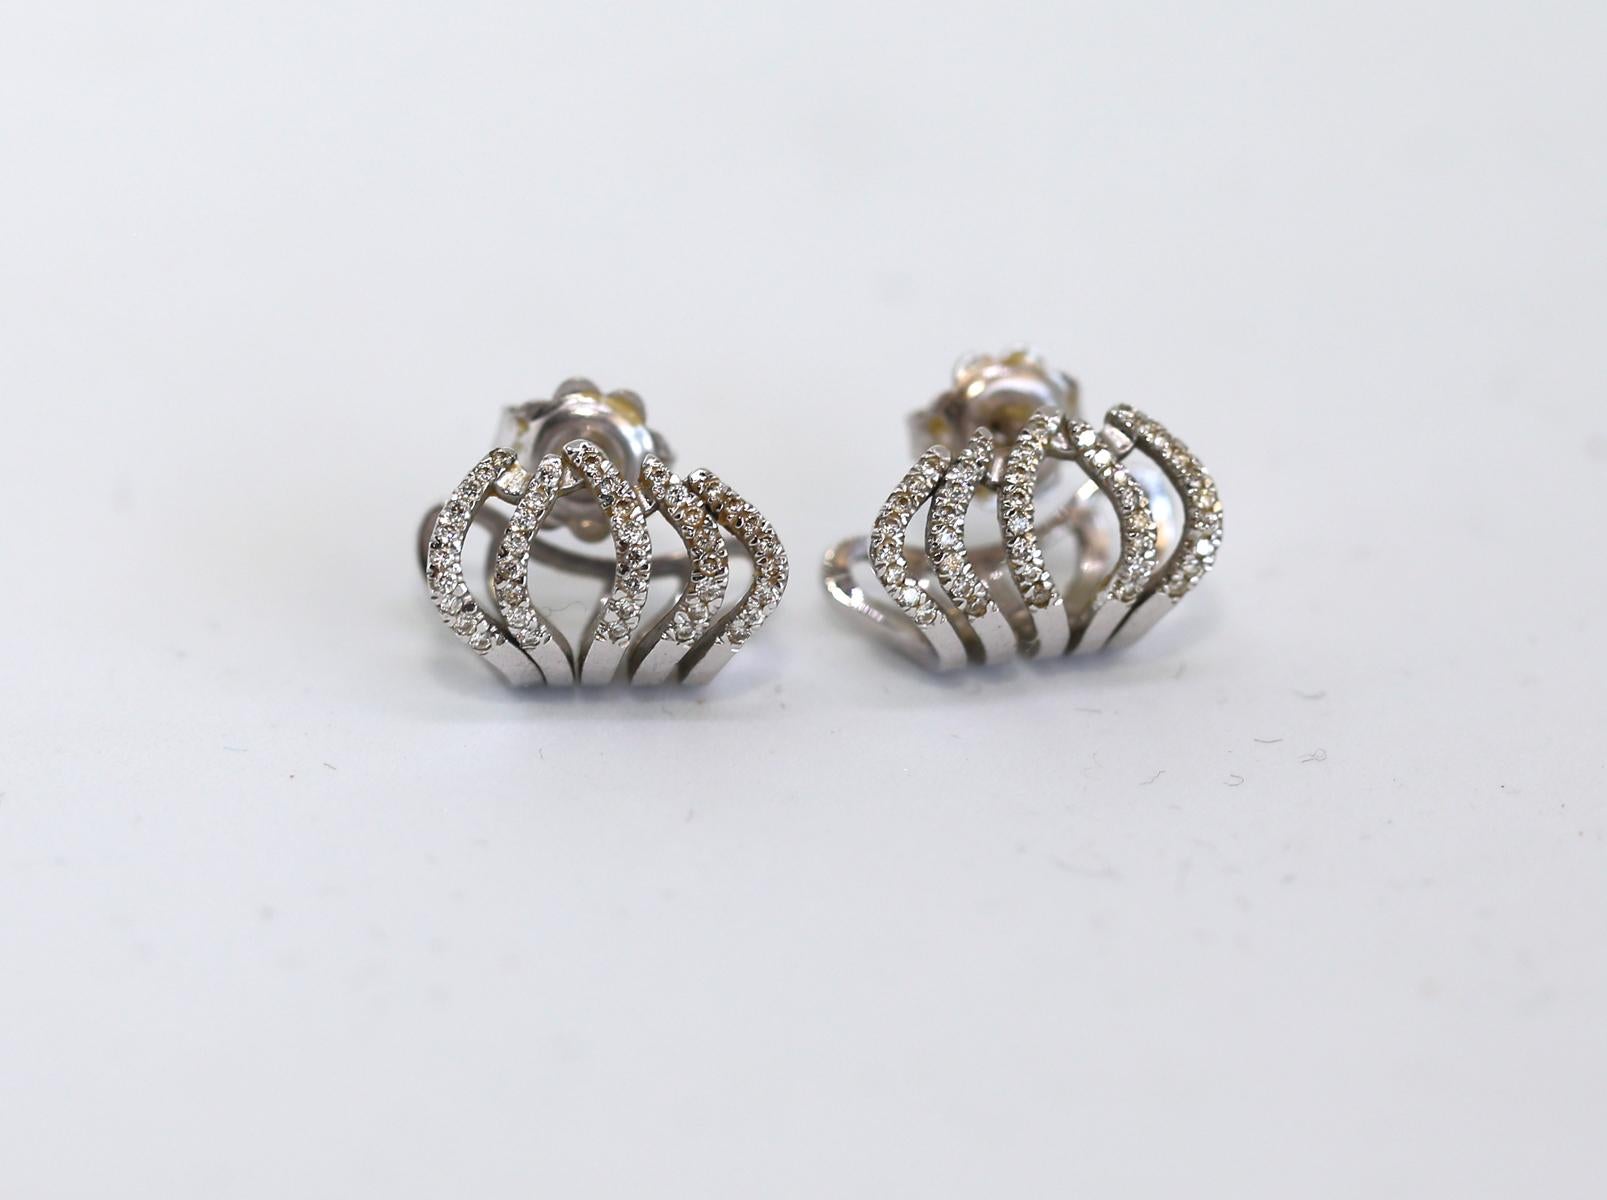 Cuff Earrings On-Ear 1.5 Carats Diamonds. White Gold. Modern style, created around 2010. It is one of these tiny elegant pieces of jewelry that only the sharp eye notices, yet it brings sophistication to any daily outfit. It shows style without